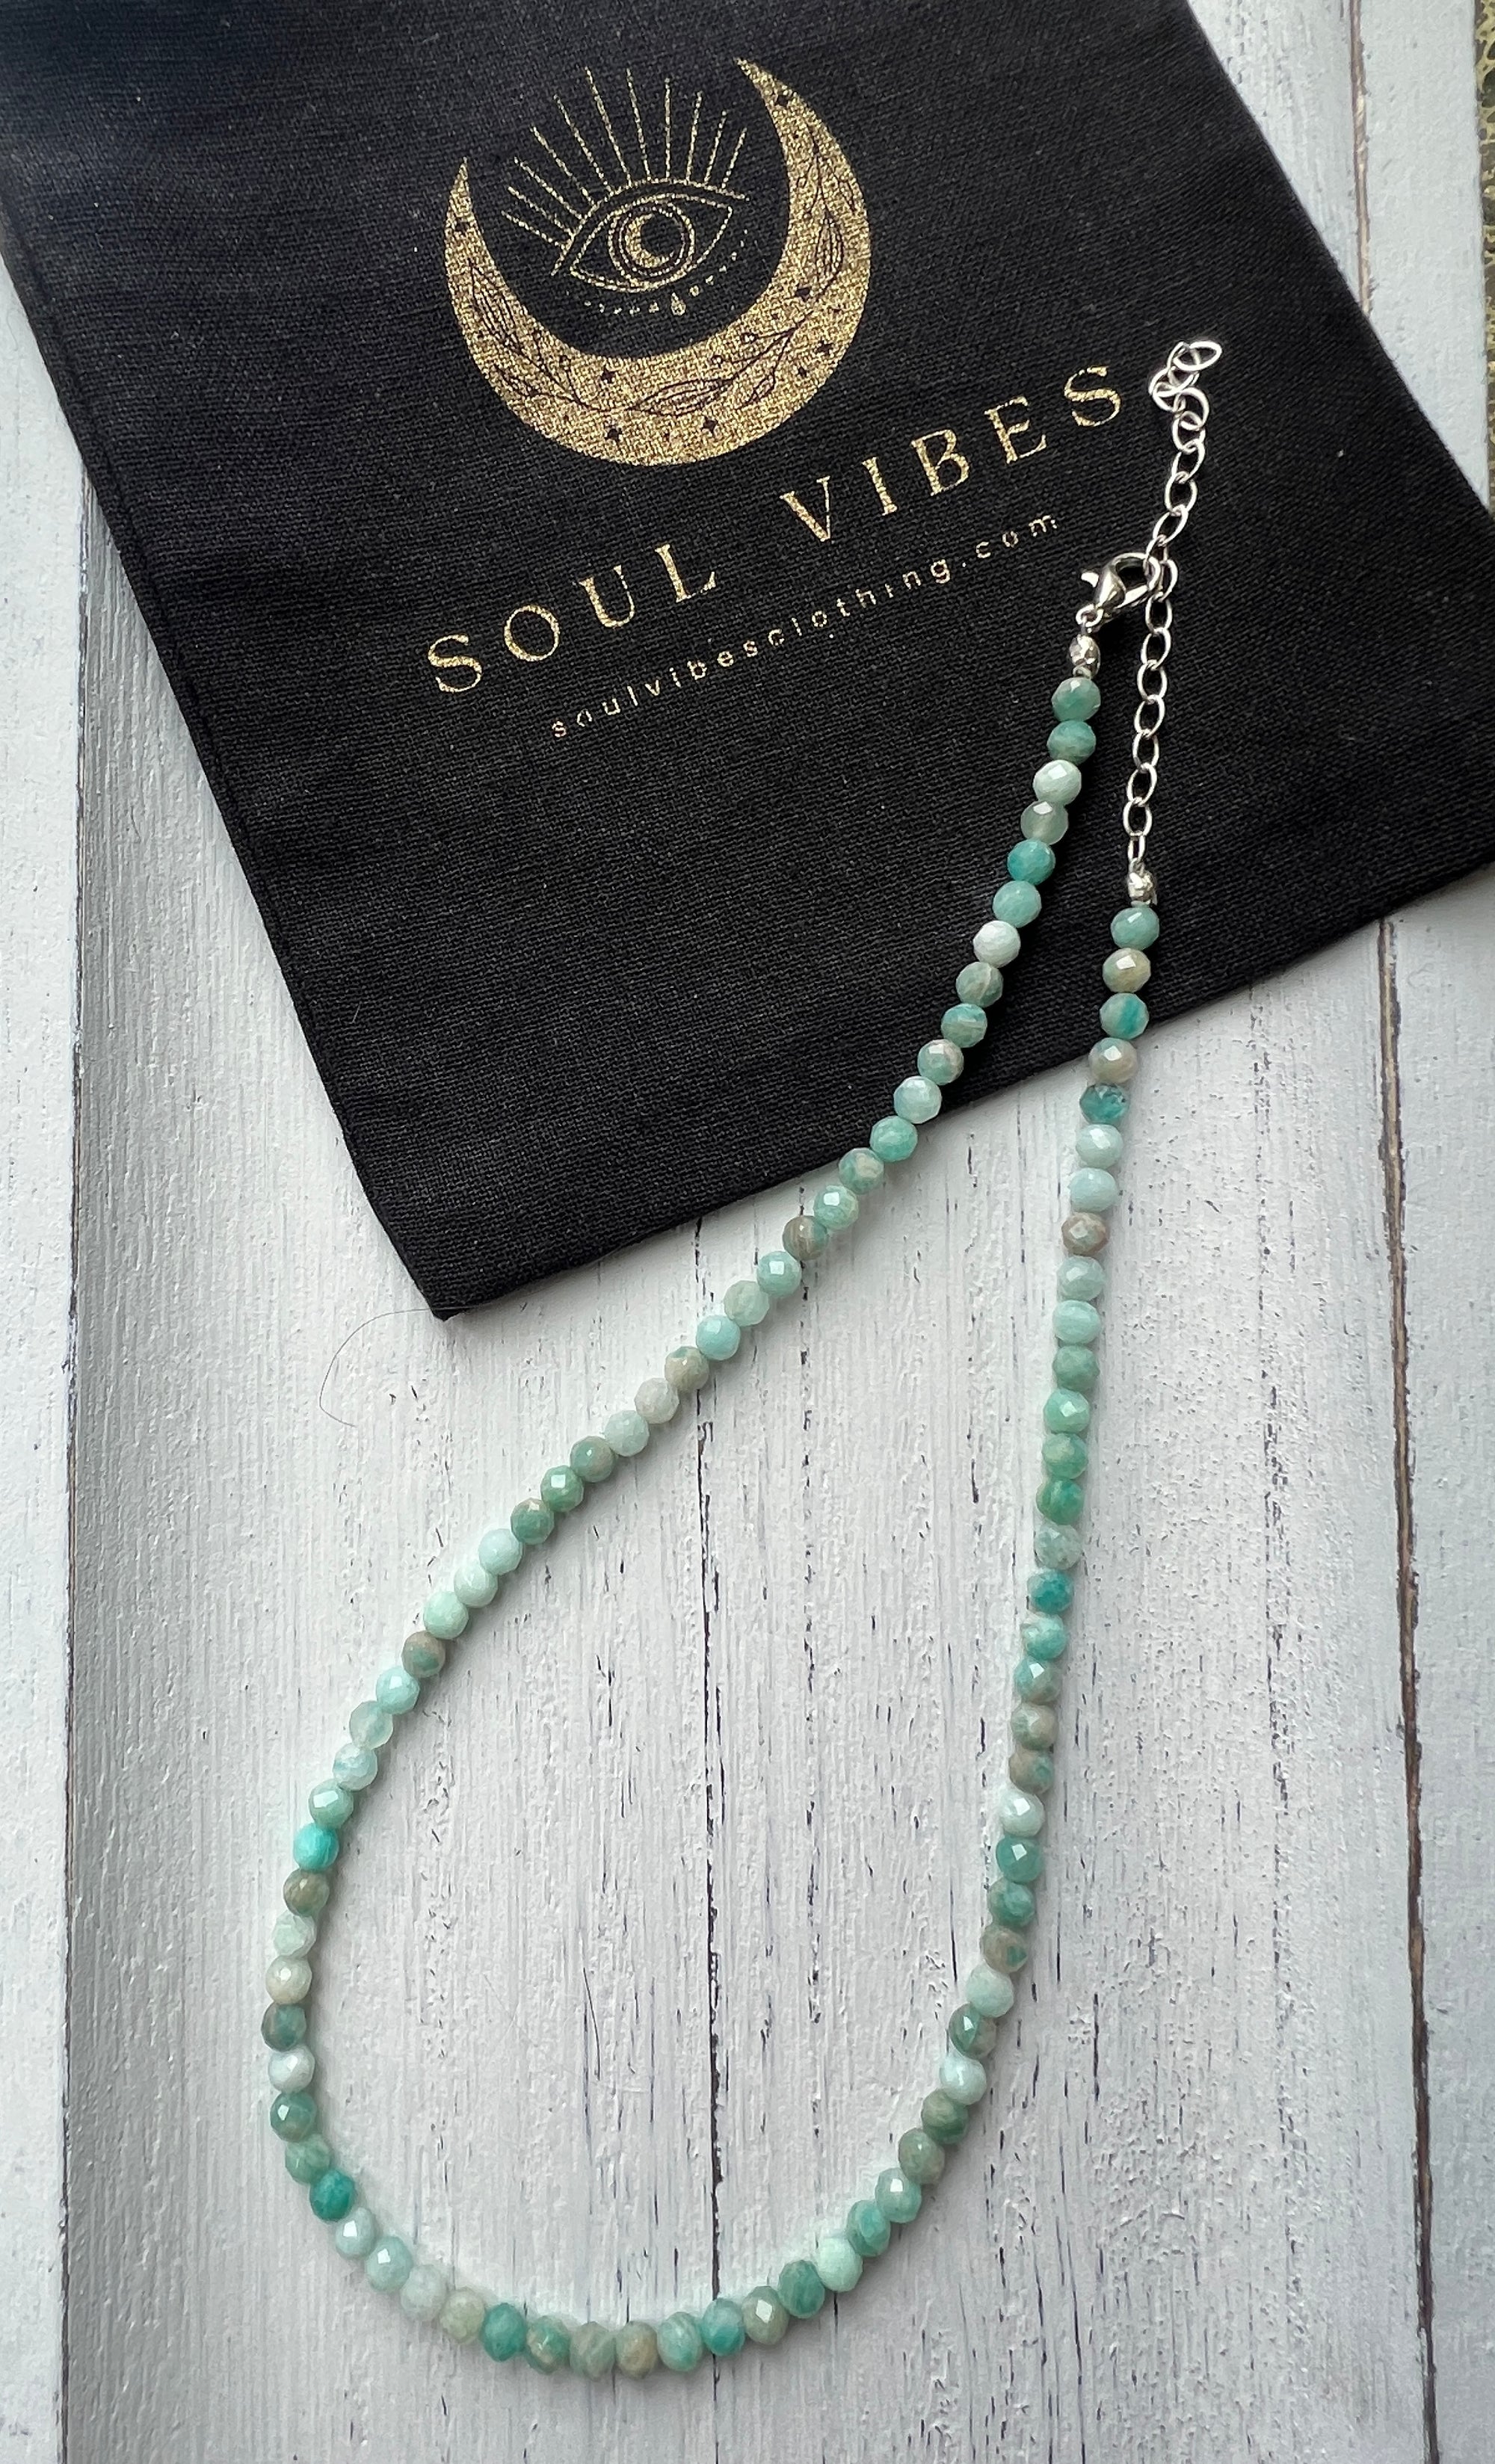 THE TRANQUILITY ~ NECKLACE (rounded stones)